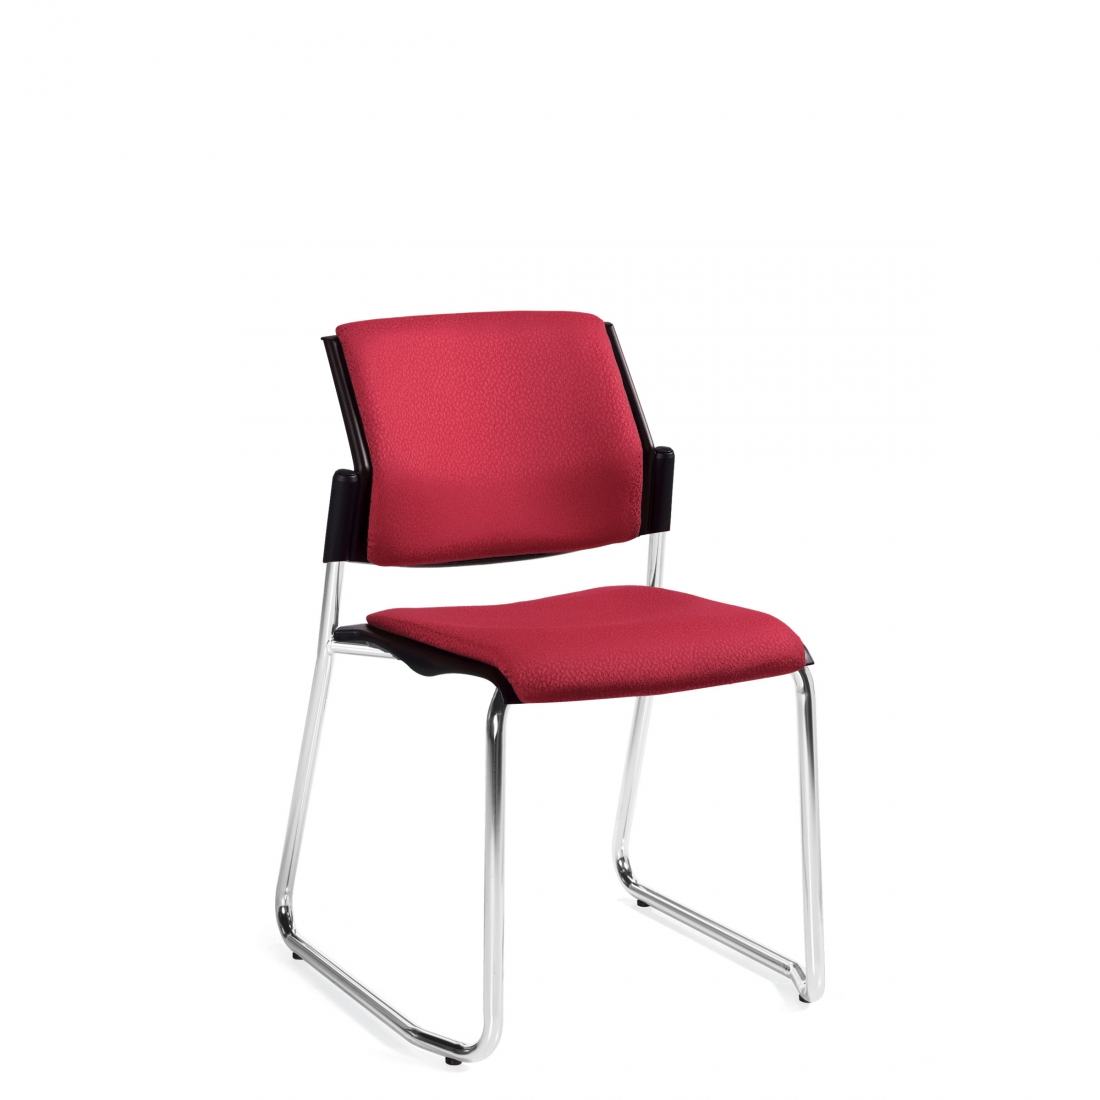 Stacking Chair, Sled Base, Upholstered Seat, Armless